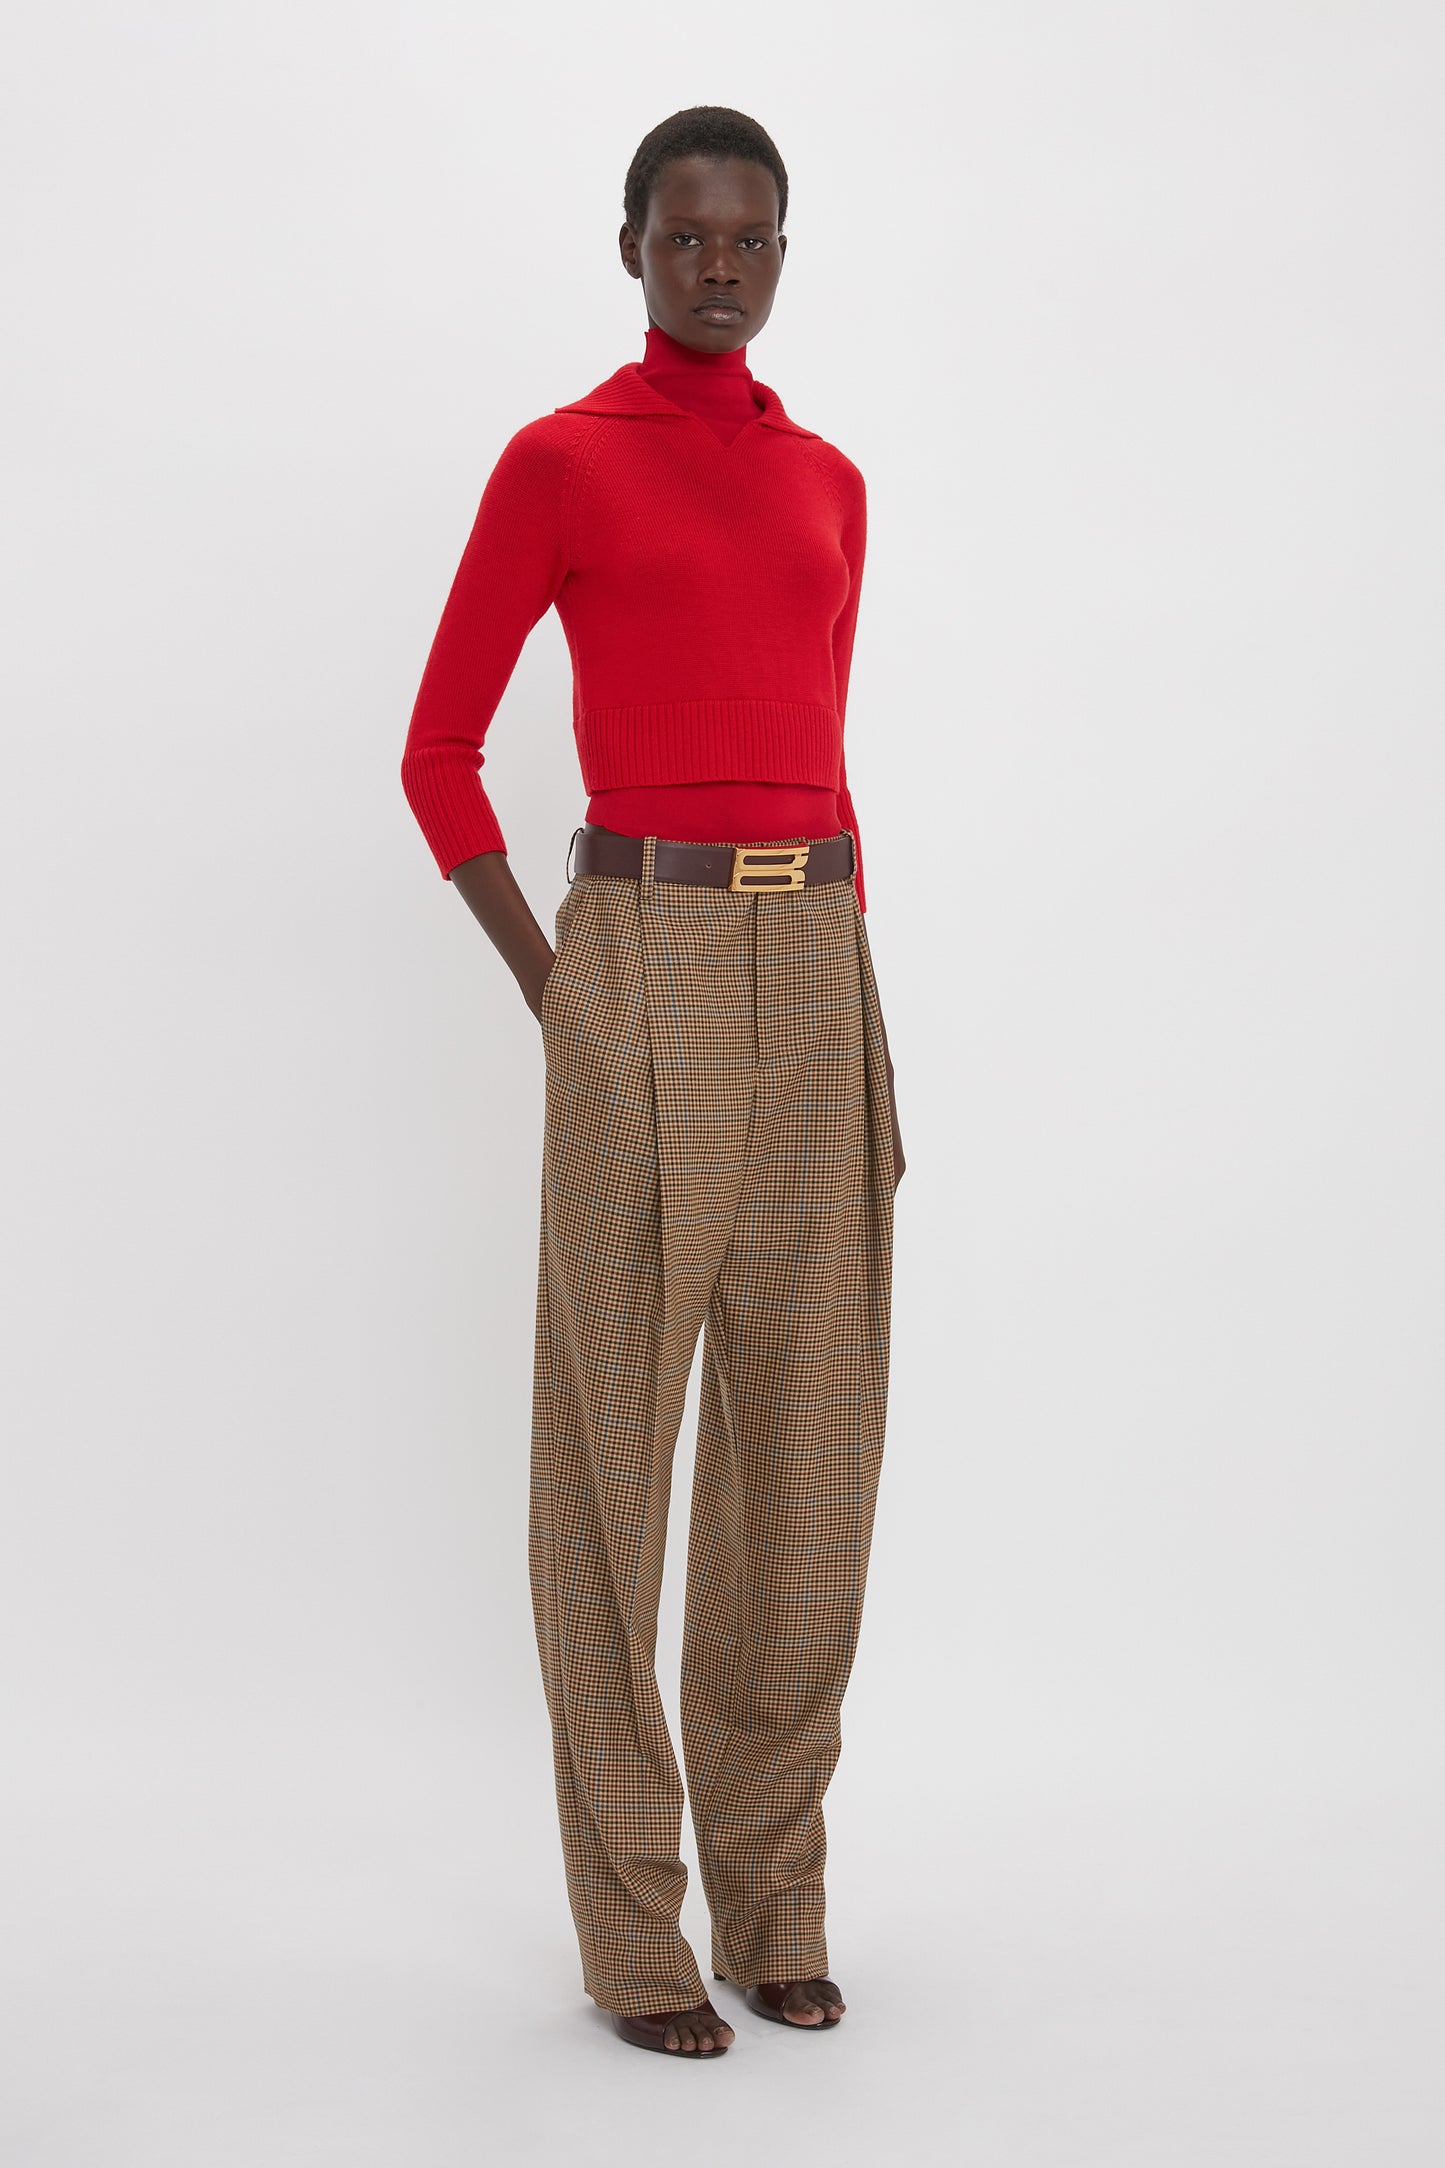 Person wearing a Victoria Beckham Double Layer Top In Deep Red and brown plaid wide-leg trousers with a brown belt, standing against a white background.